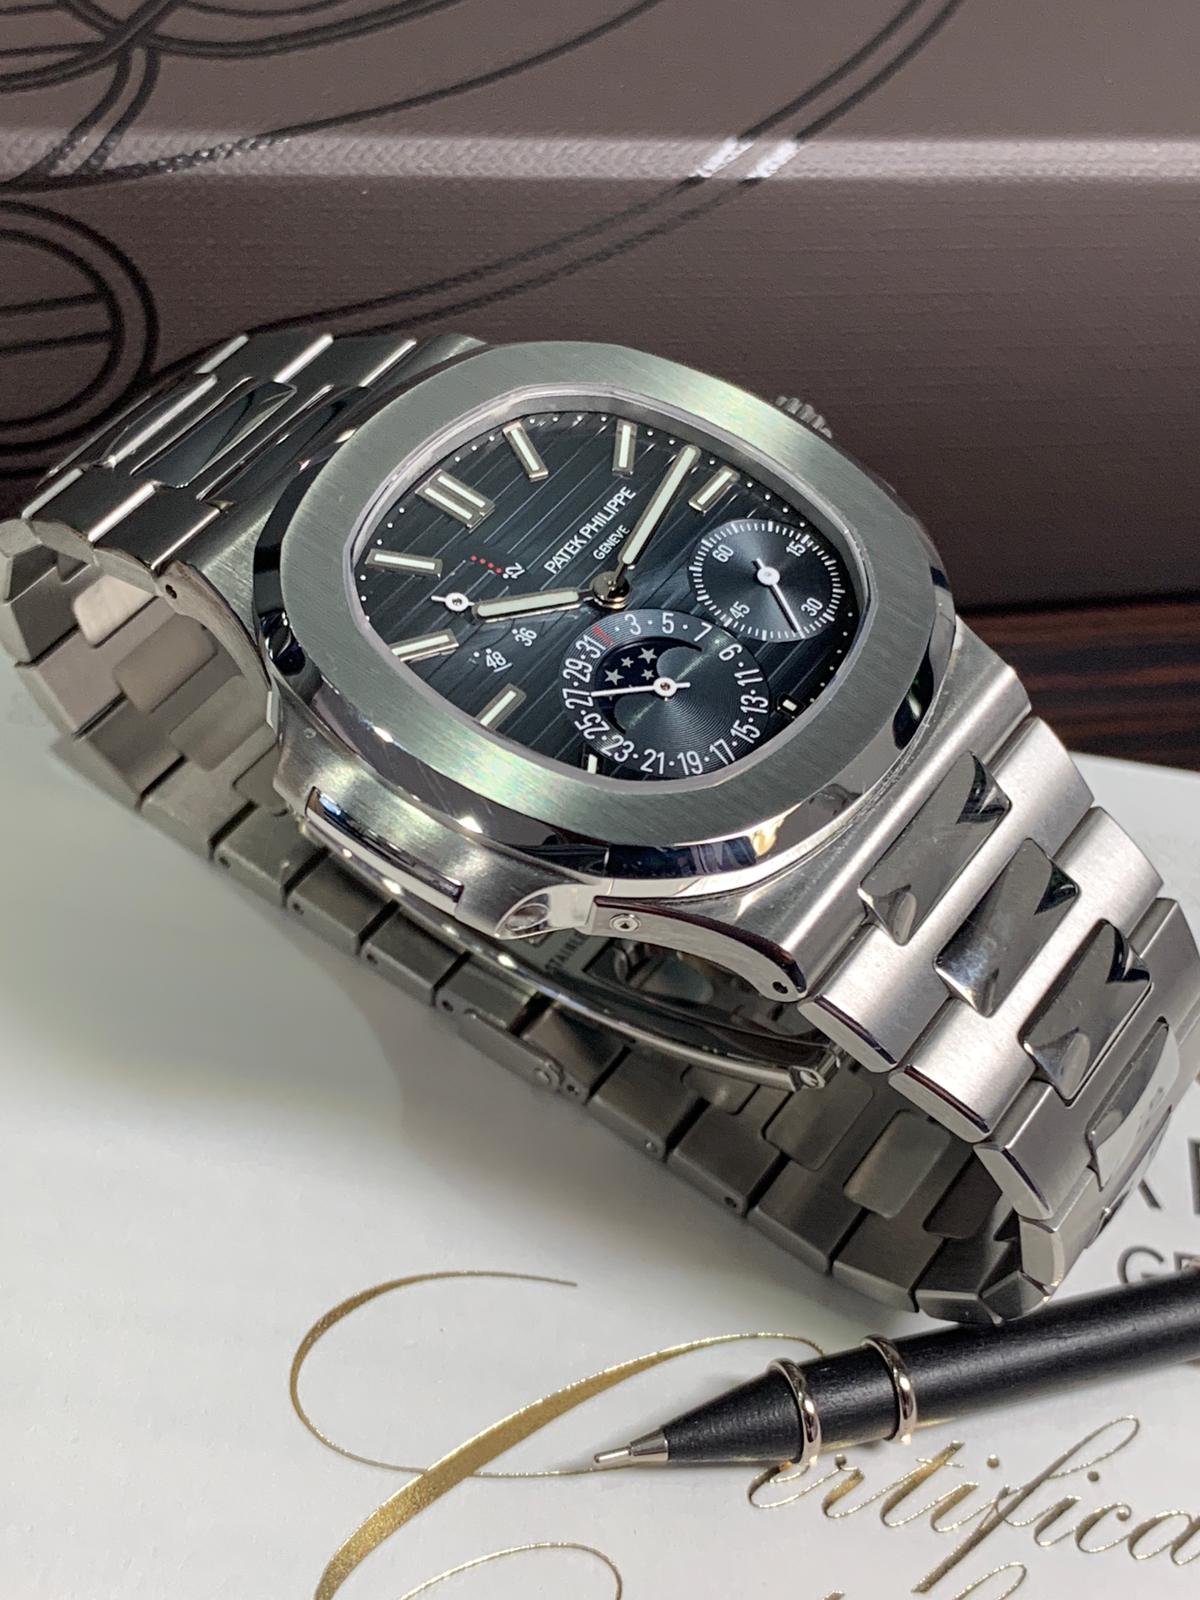 A PATEK PHILIPPE NAUTILUS BLUE DIAL MOONPHASE 5712/1a - Carr Watches